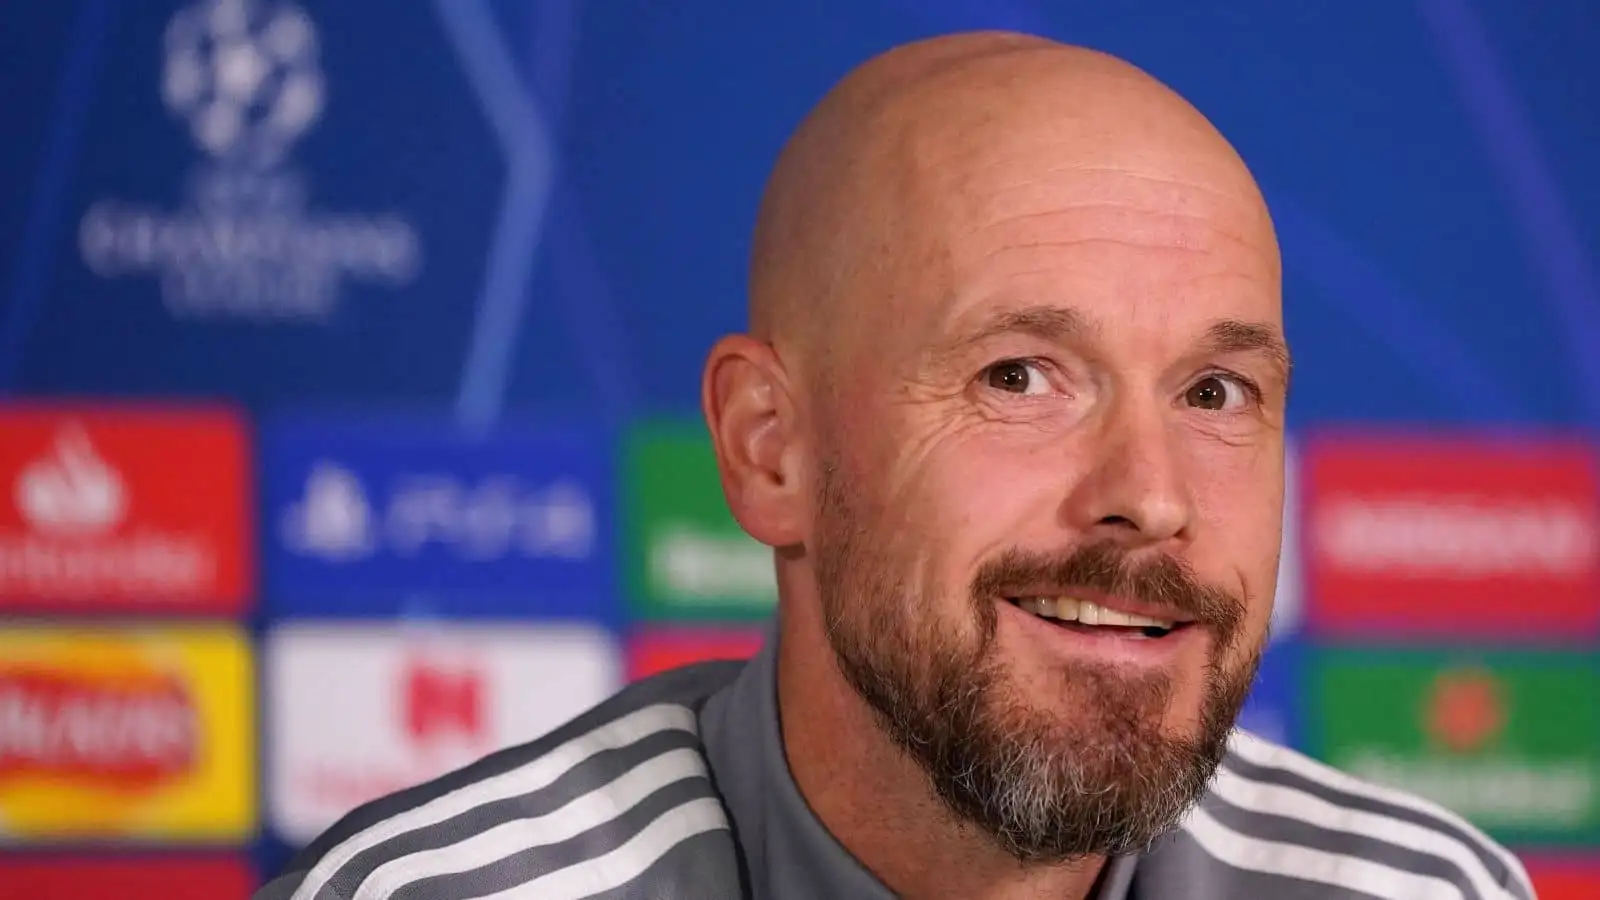 Erik Ten Hag set to become Man Utd manager - seen here during Champions League press conference with Ajax